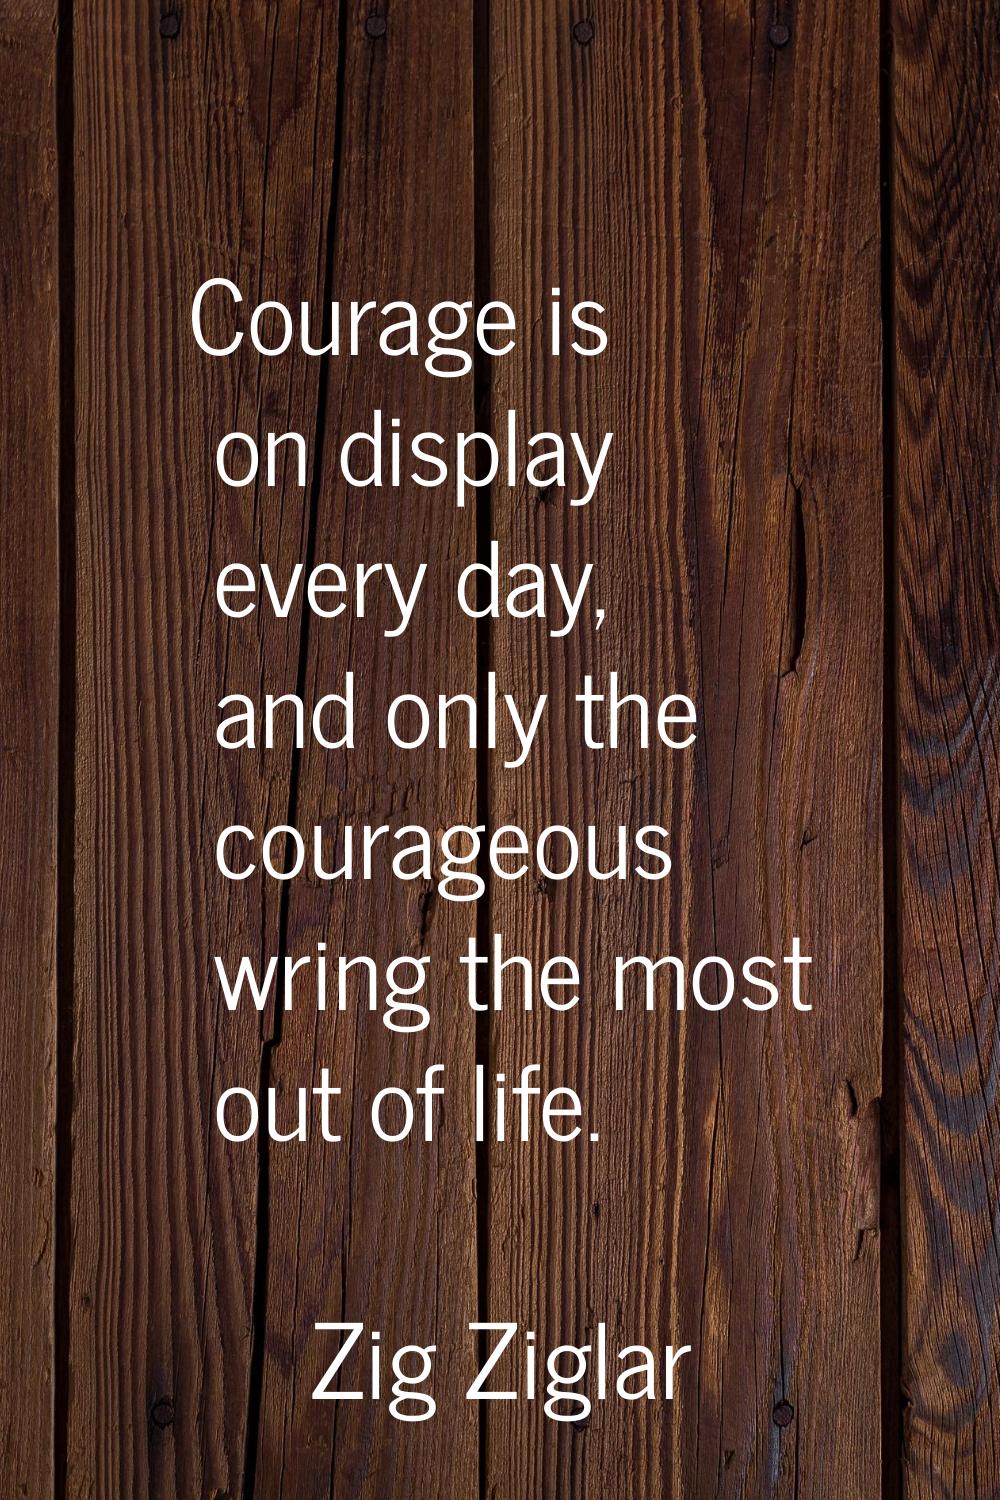 Courage is on display every day, and only the courageous wring the most out of life.